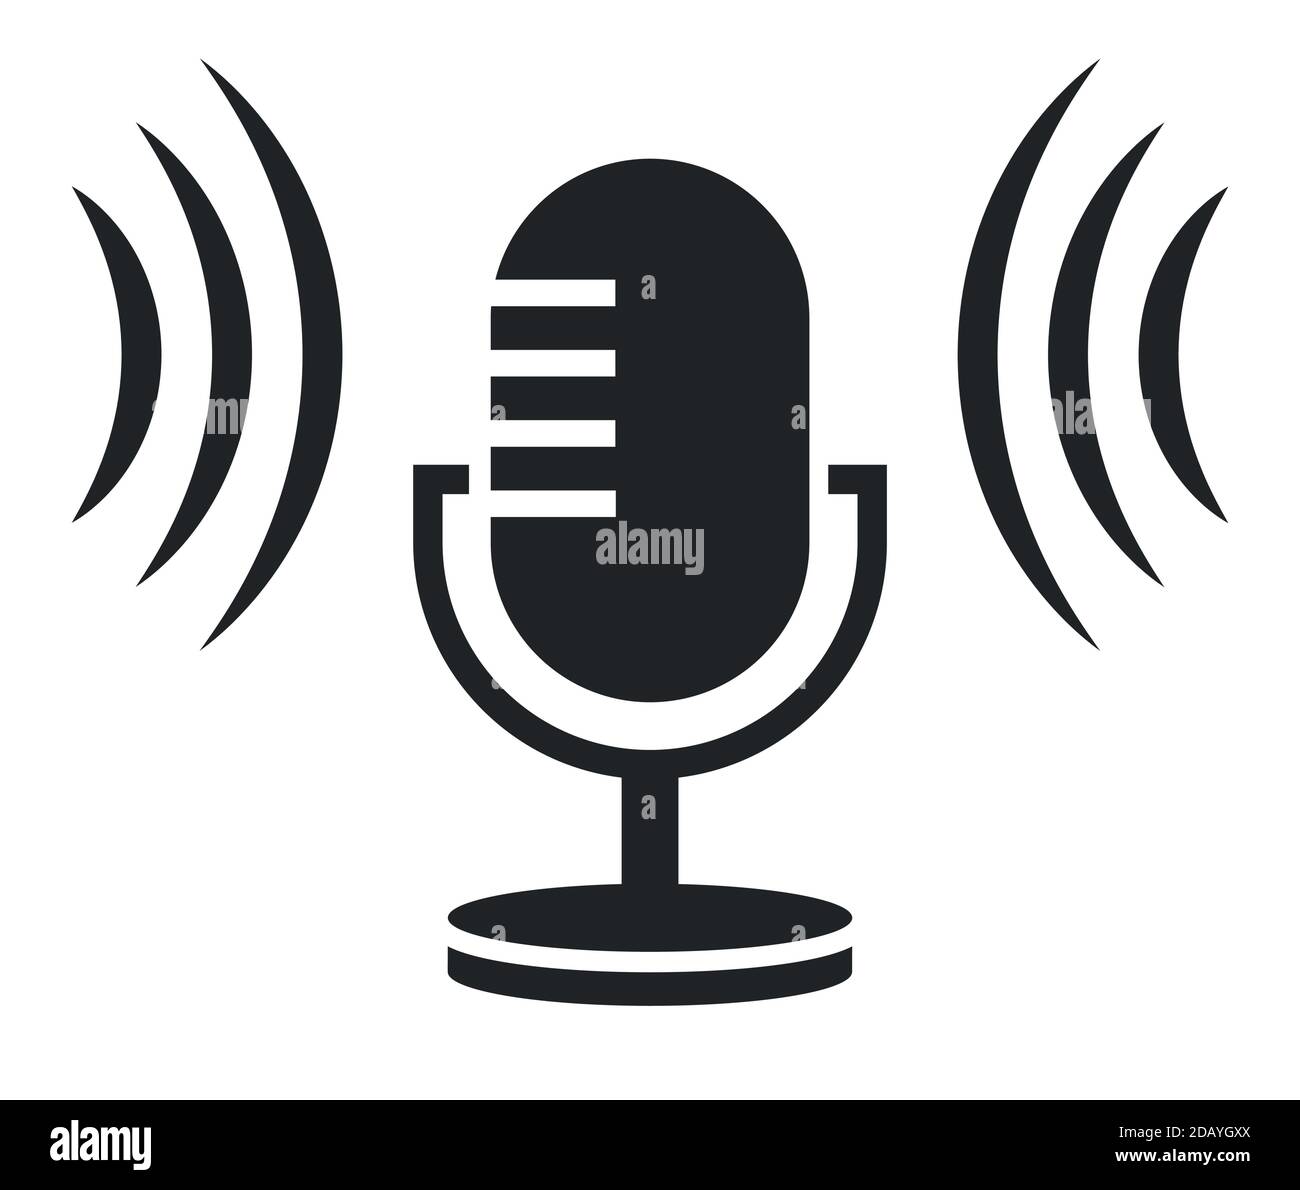 Podcast radio media microphone symbol and icon with sound waves vector illustration Stock Vector